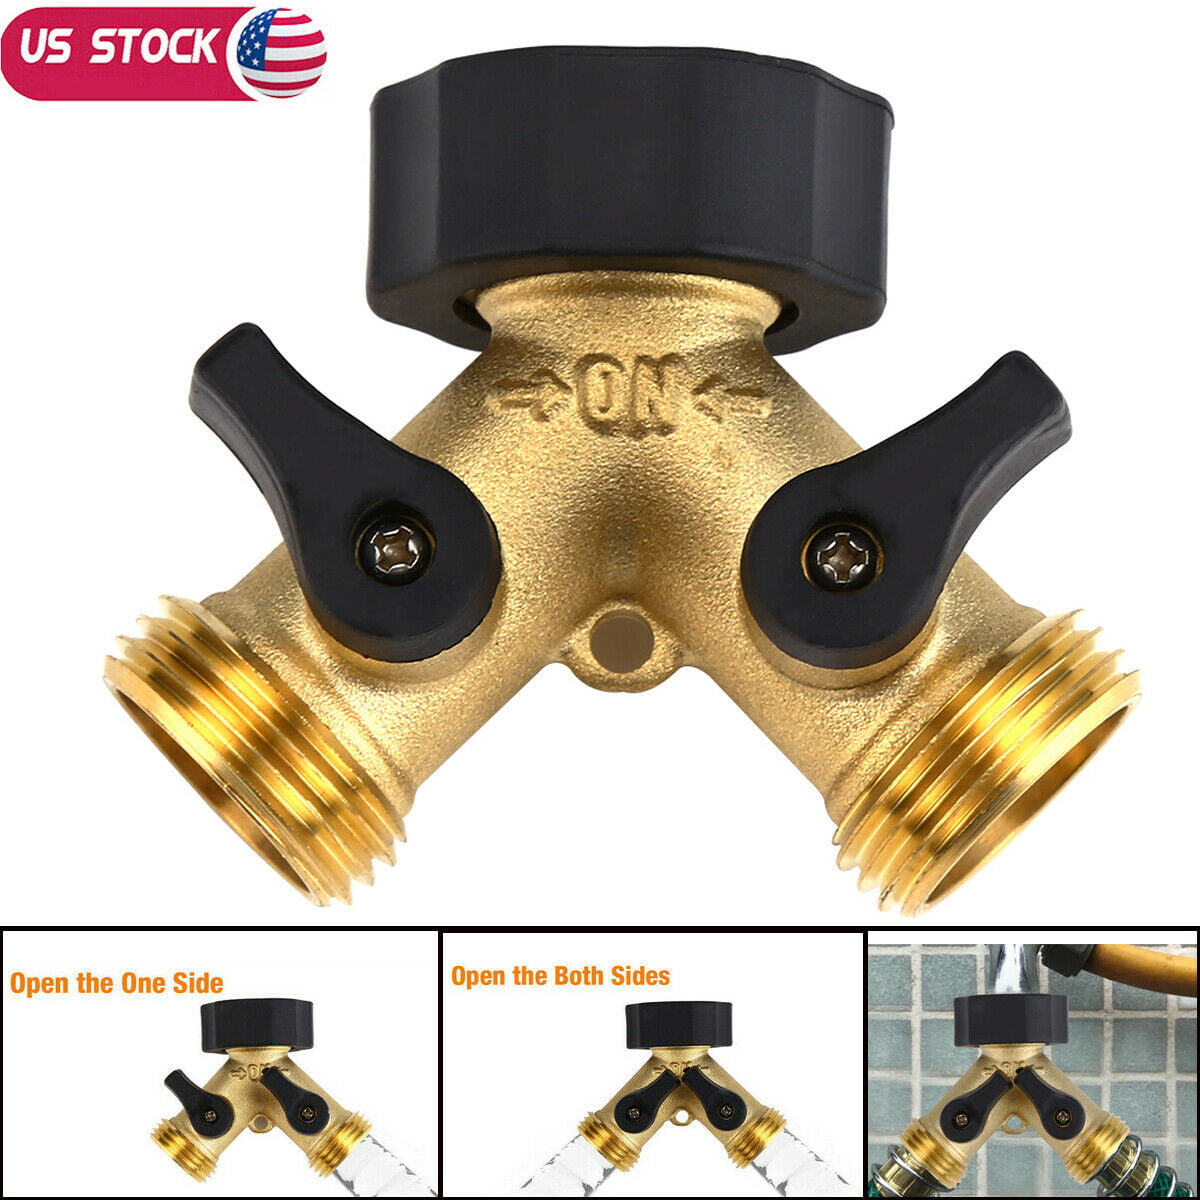 Garden Hose Connector MAXFLO Heavy Duty Brass Hose Shut Off Valve 2 Pack Fits All Standard Hoses Water Hose Valve Shut Off Shutoff Valve 4 Extra Pressure Washers